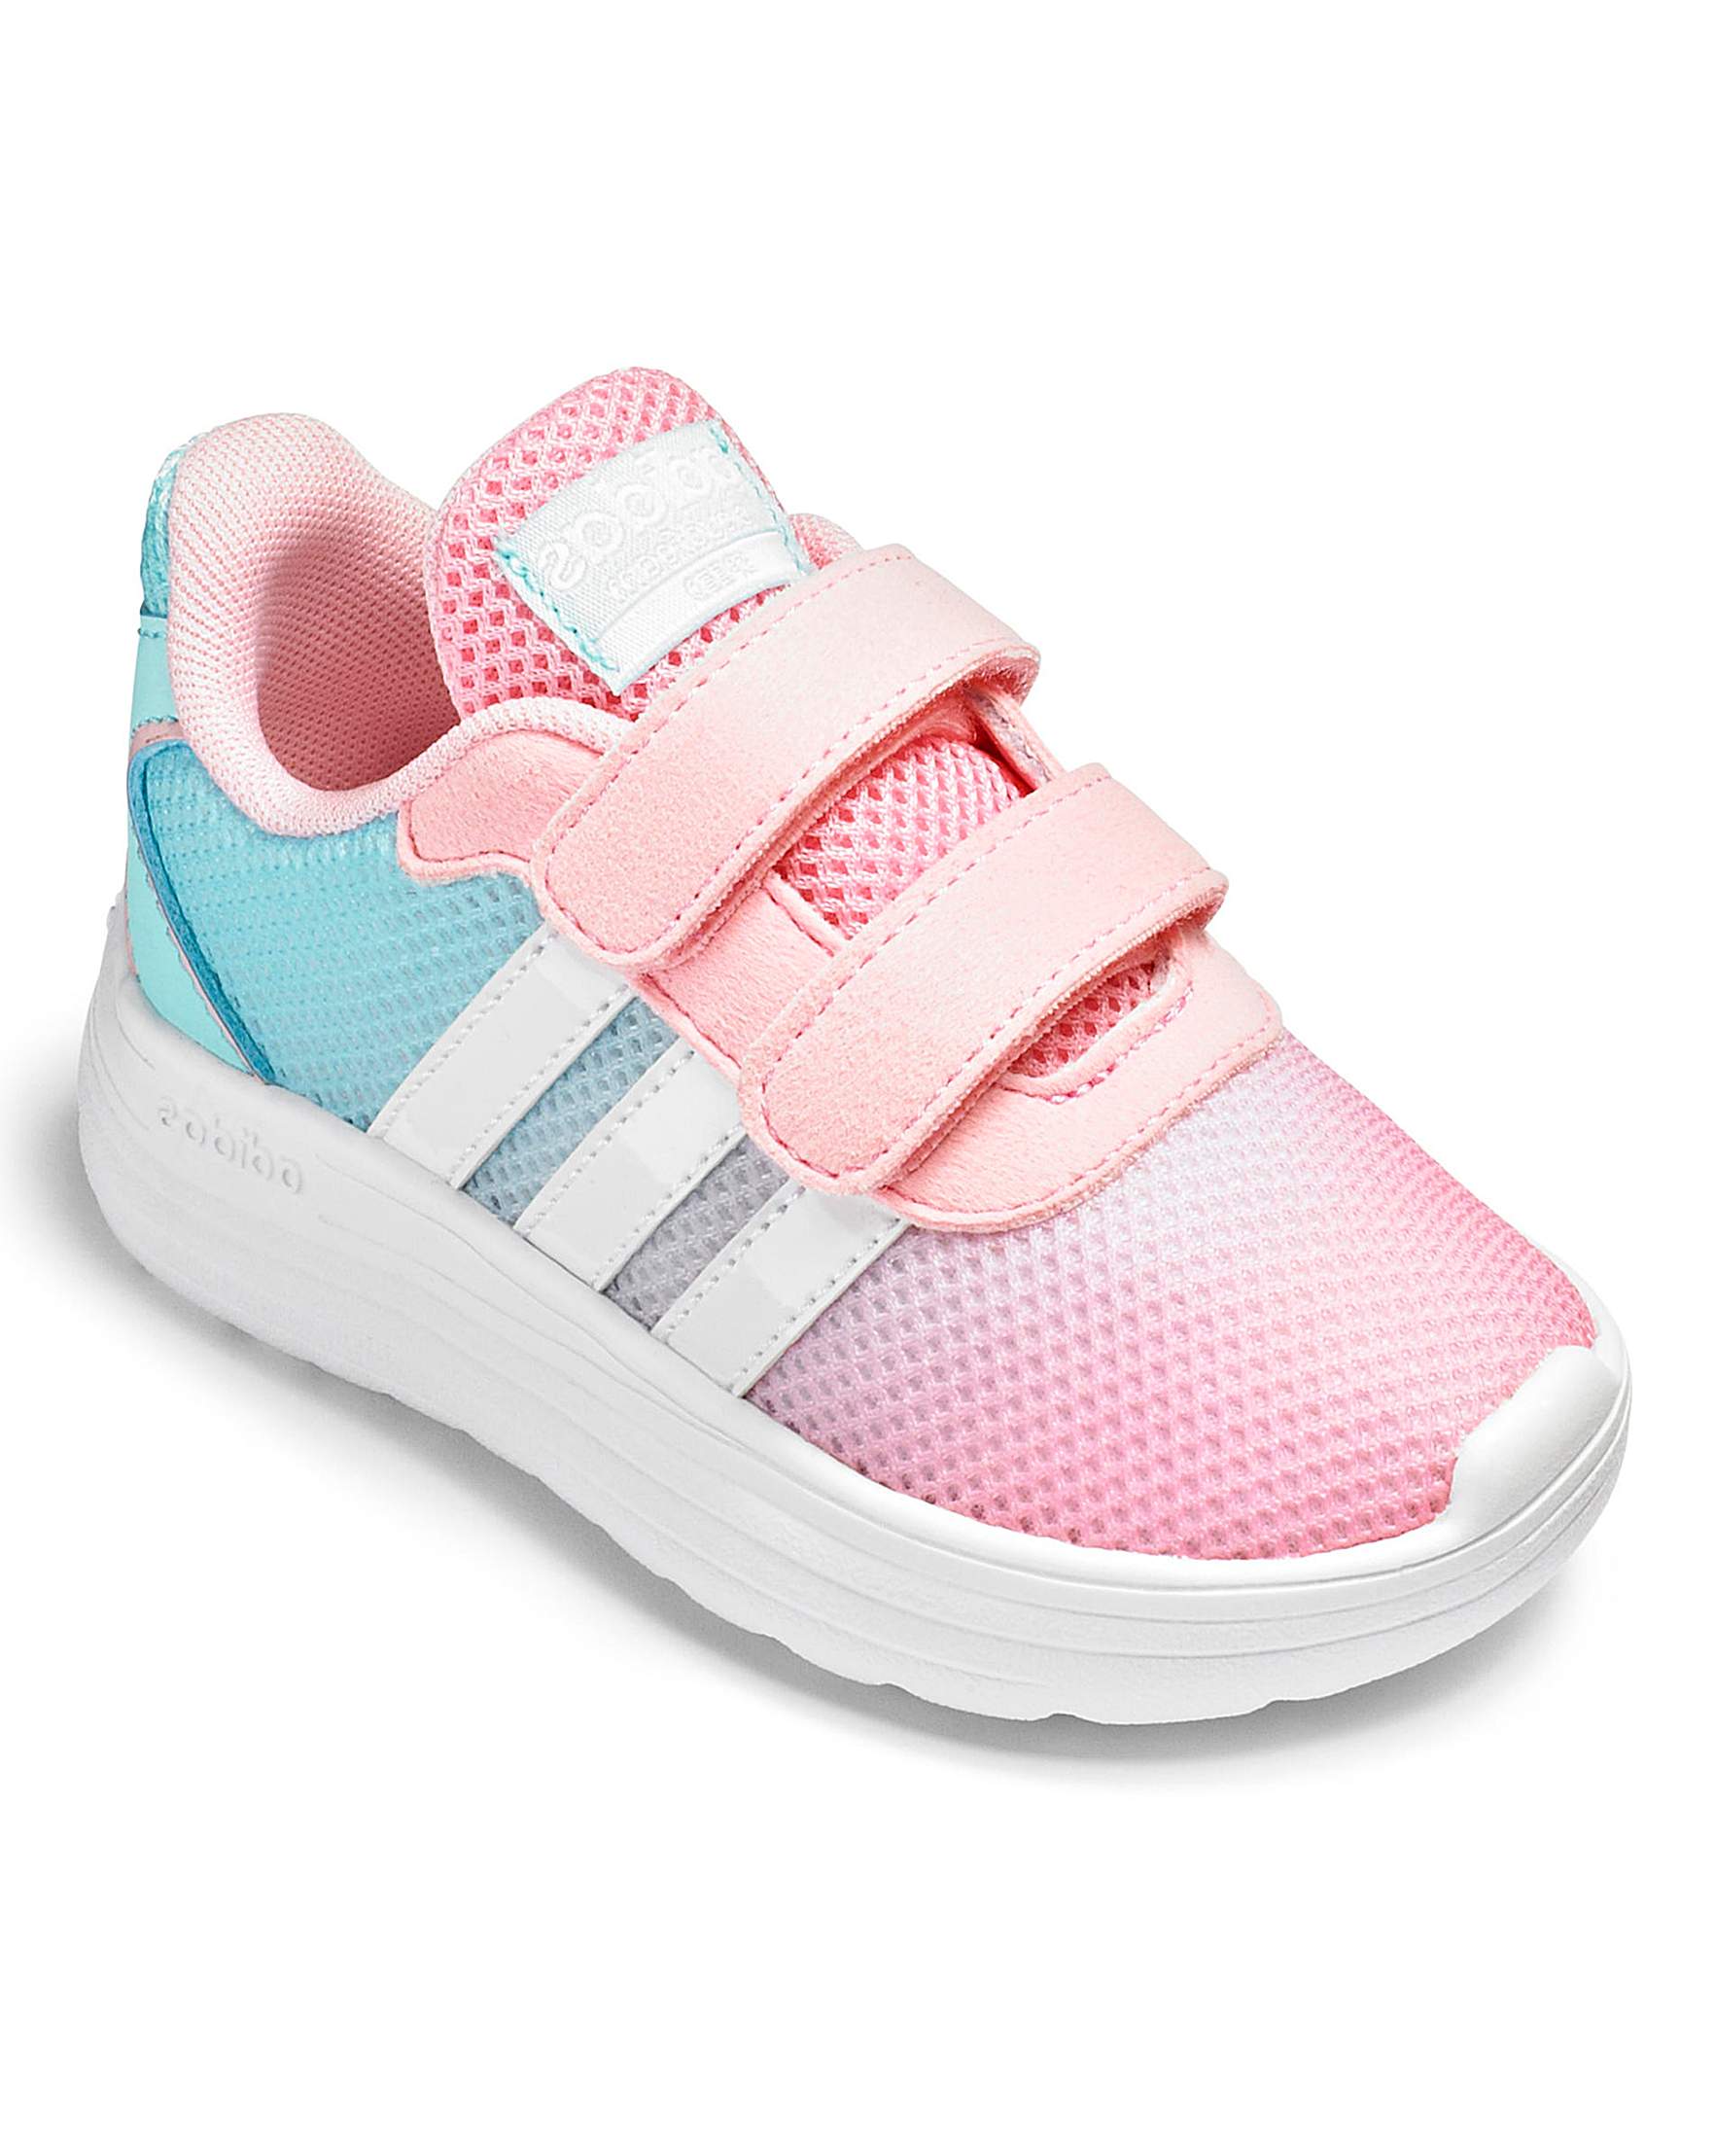  adidas  shoes  for baby  girls